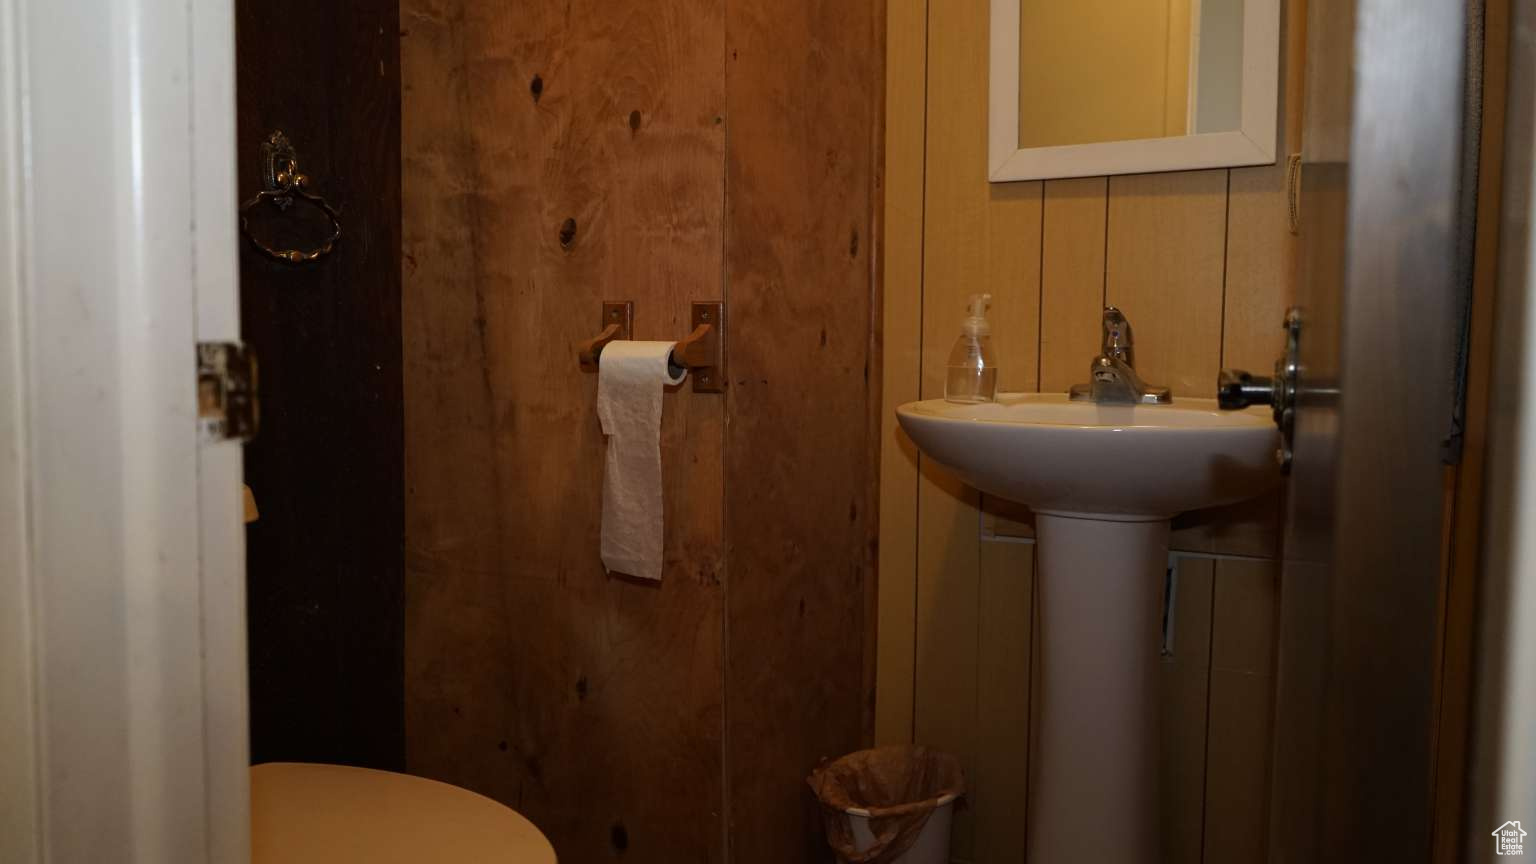 Bathroom featuring wood walls and toilet